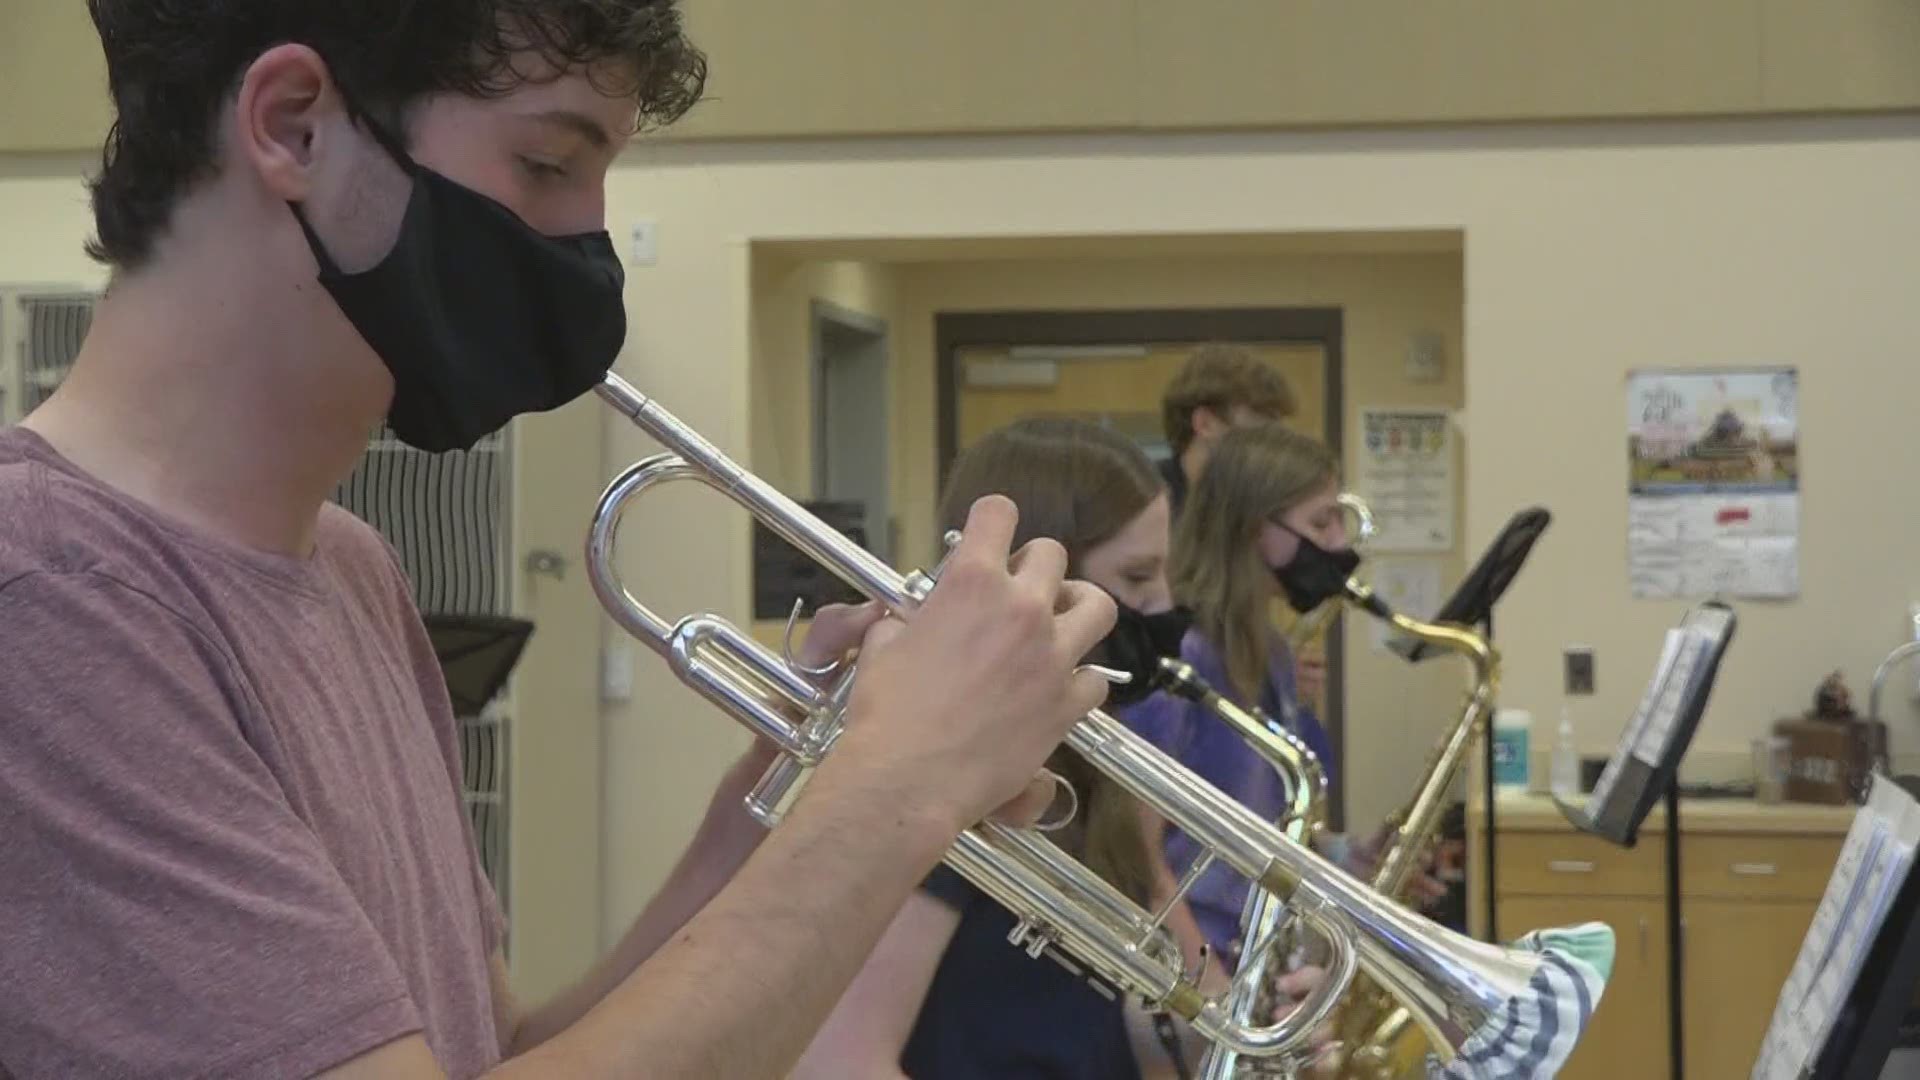 One Maine high school band is trying to raise money to help pay to perform at a very popular vacation destination in Florida.